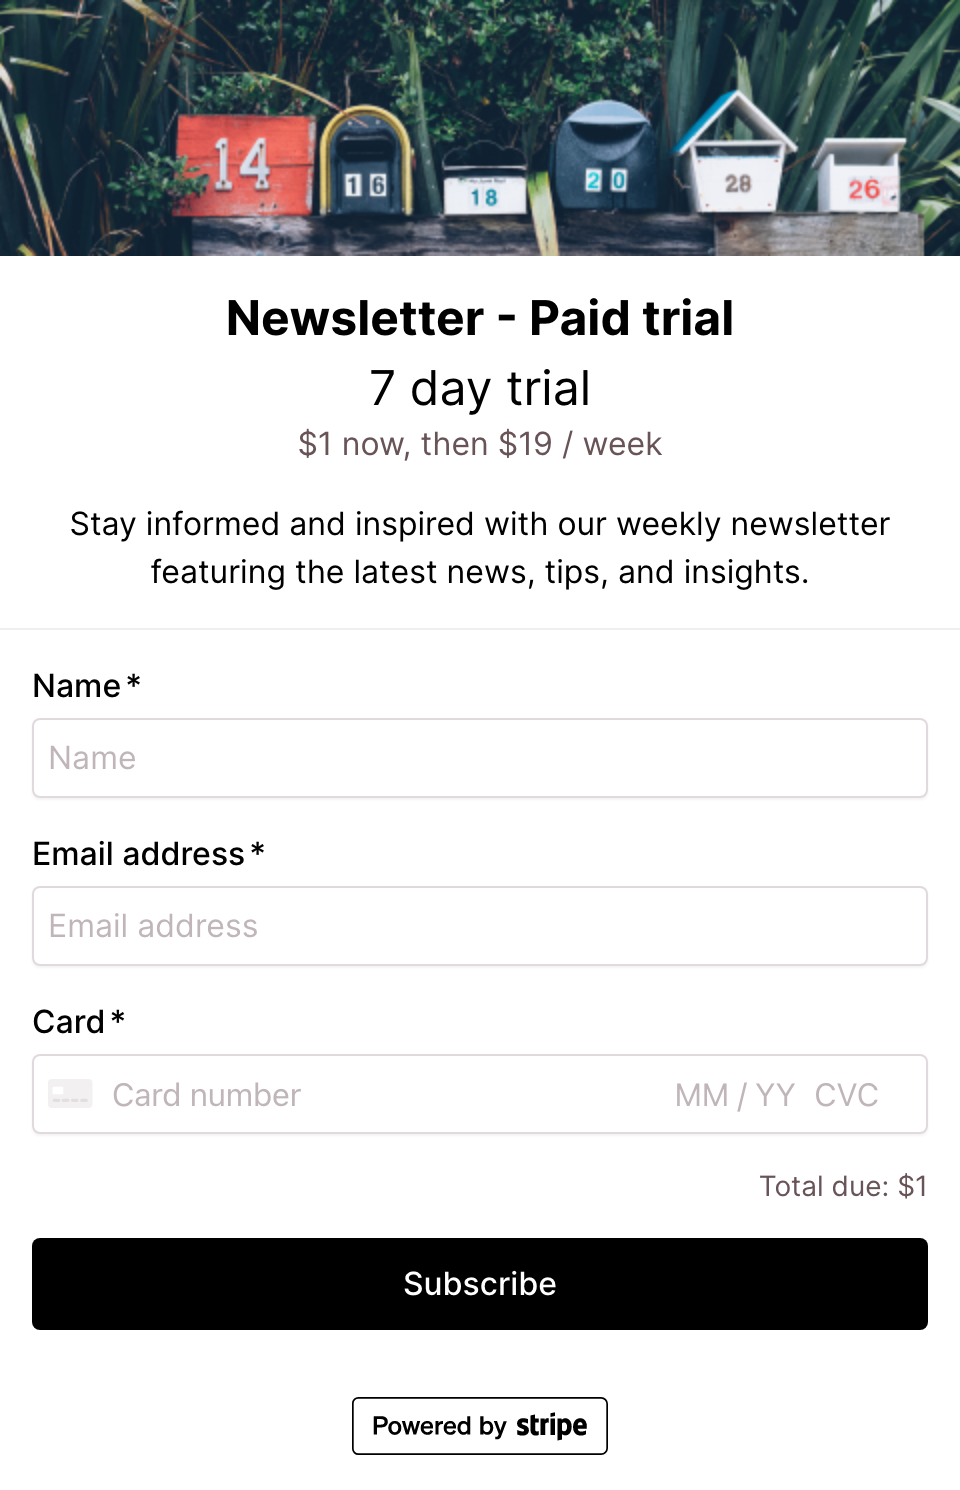 Newsletter paid trial checkout form